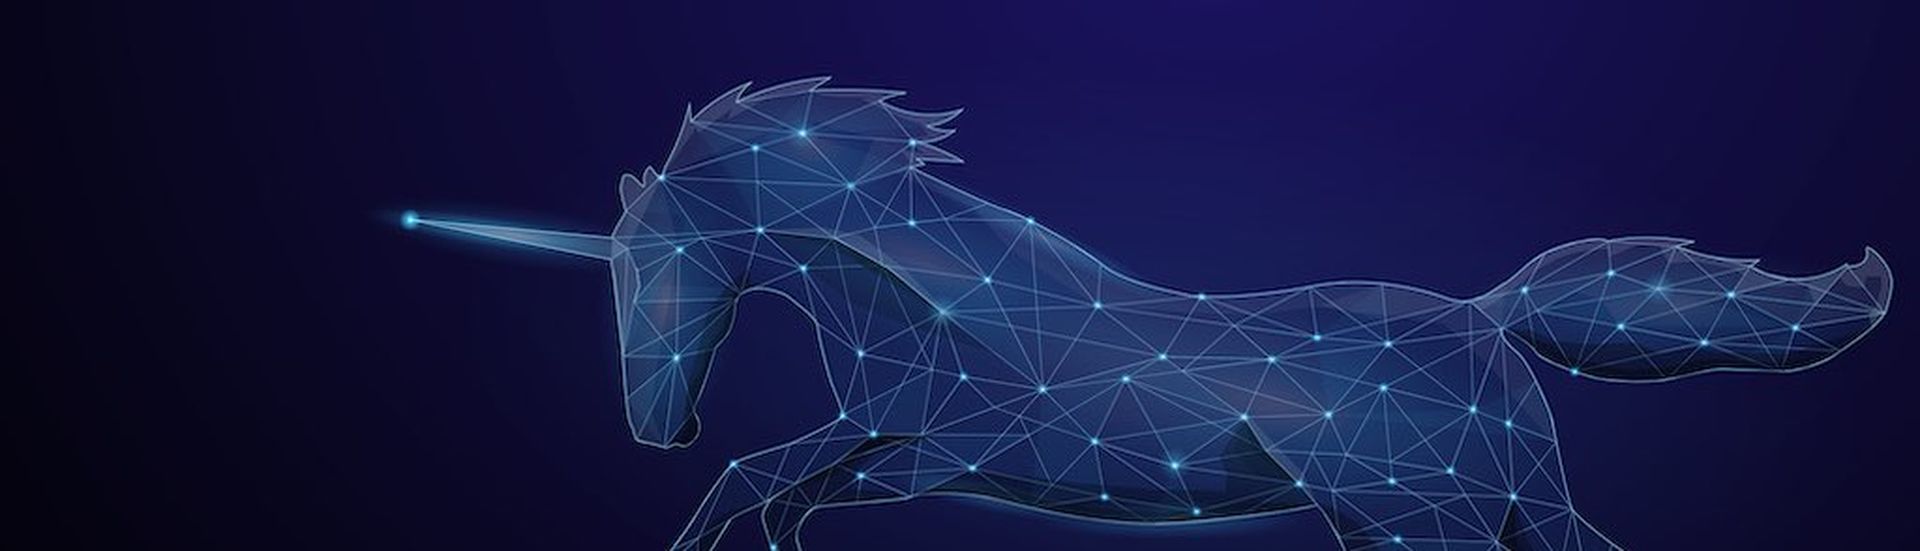 Abstract image of a Unicorn in the form of a starry sky, consisting of points, lines, and shapes in the form of planets, stars and the universe. Low poly vector background.